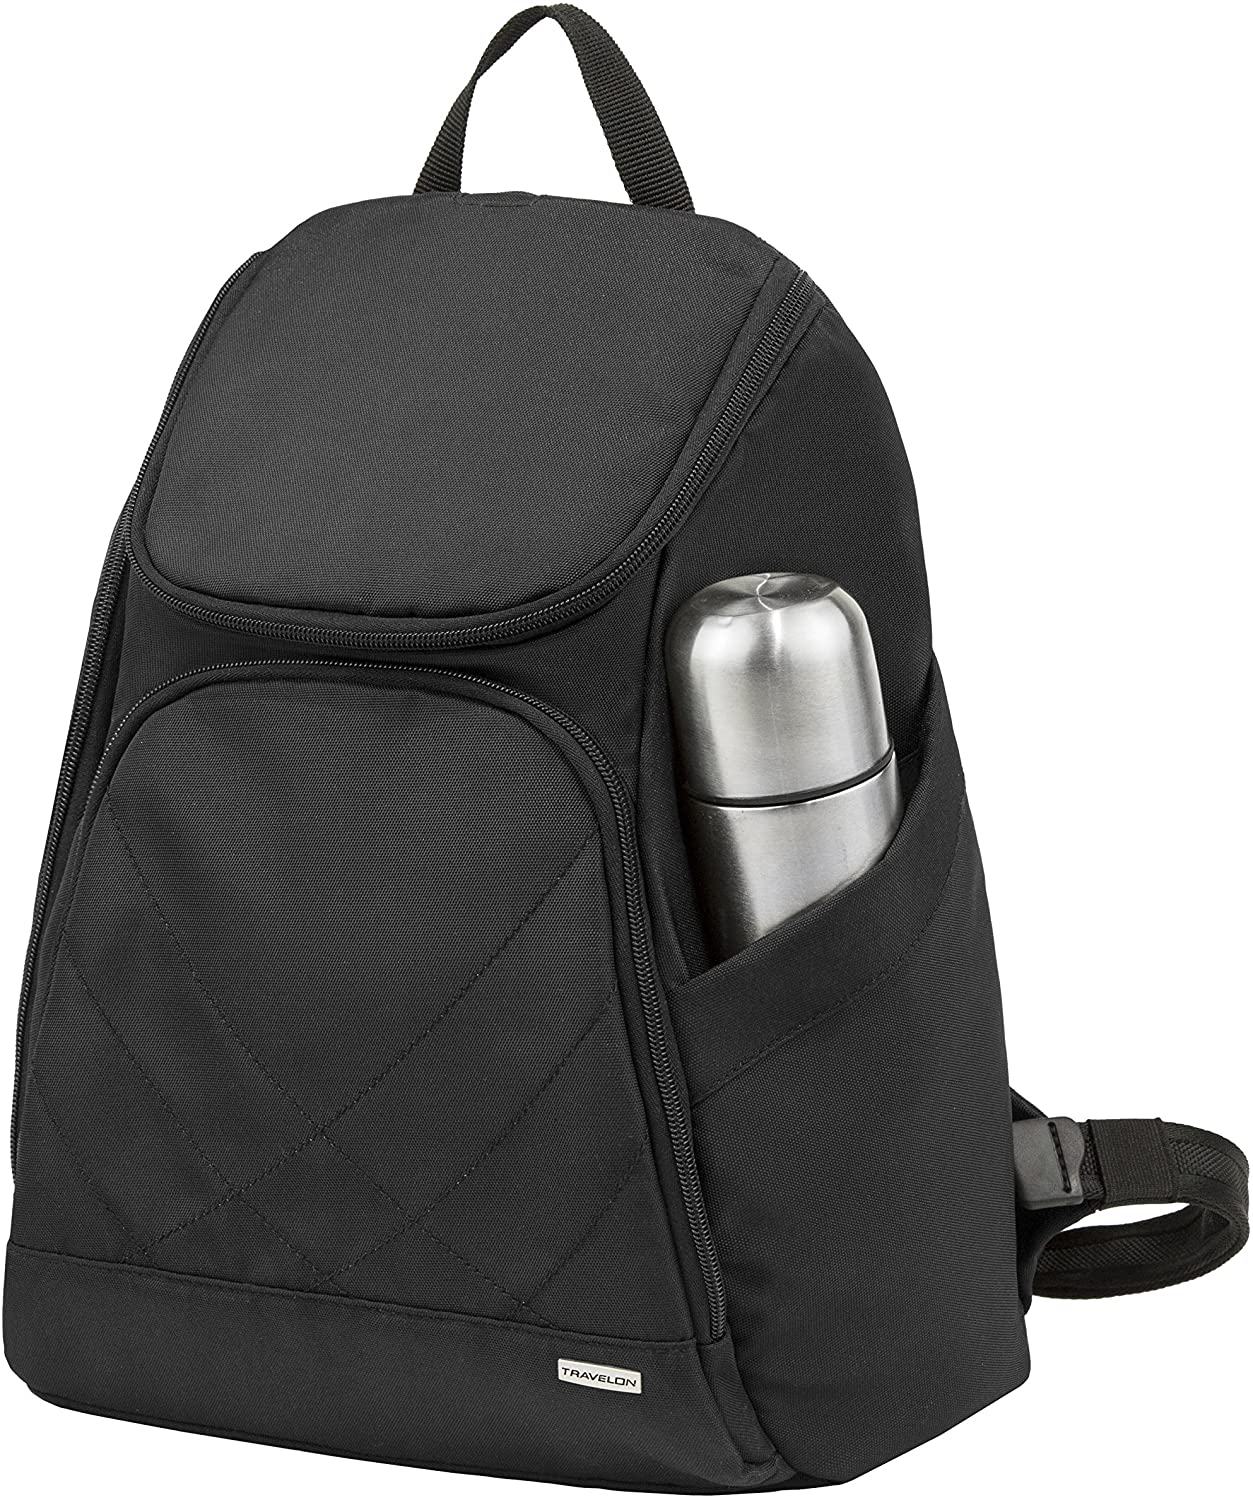 Travelon Anti Theft Classic Backpack 42310